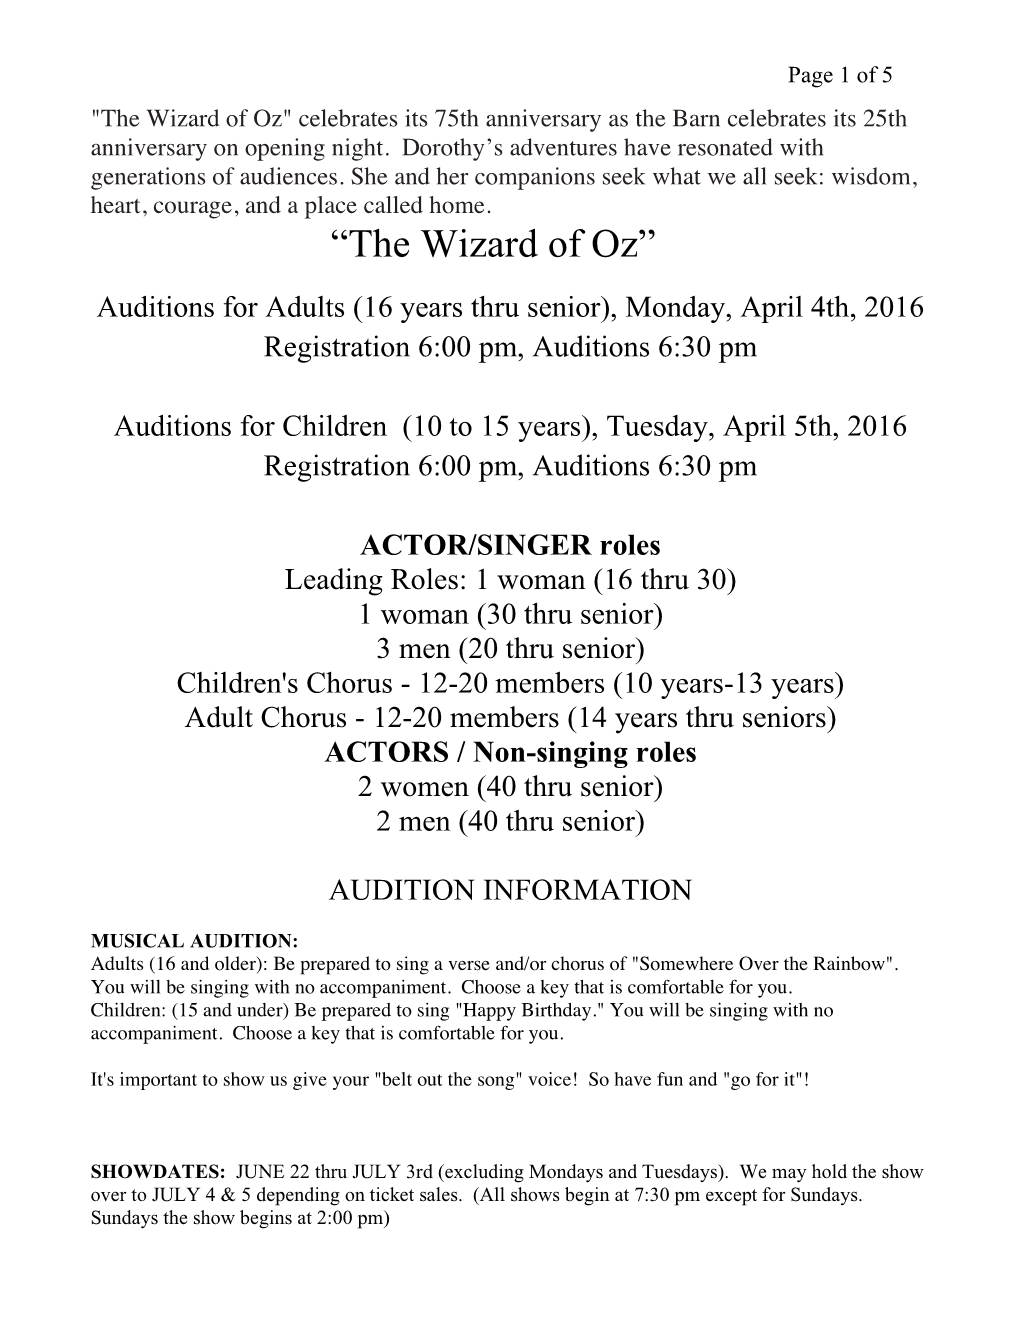 “The Wizard of Oz” Auditions for Adults (16 Years Thru Senior), Monday, April 4Th, 2016 Registration 6:00 Pm, Auditions 6:30 Pm